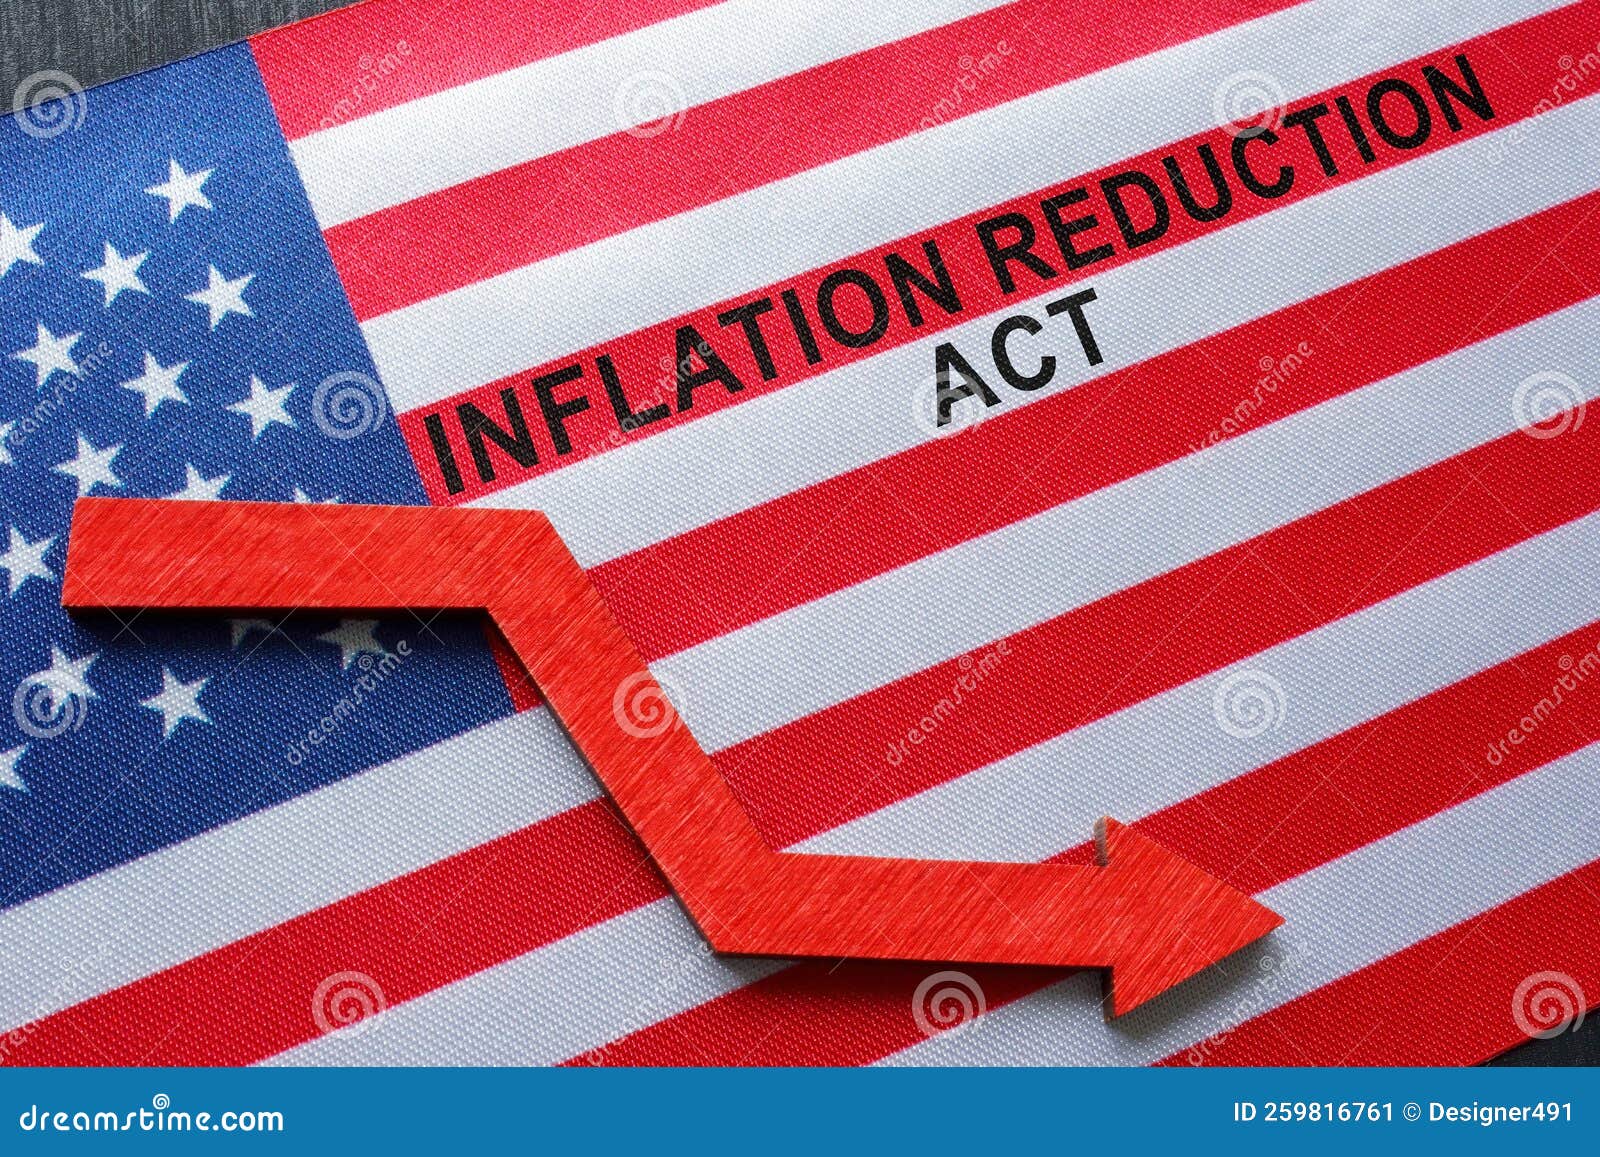 american flag with an arrow and an inscription inflation reduction act.